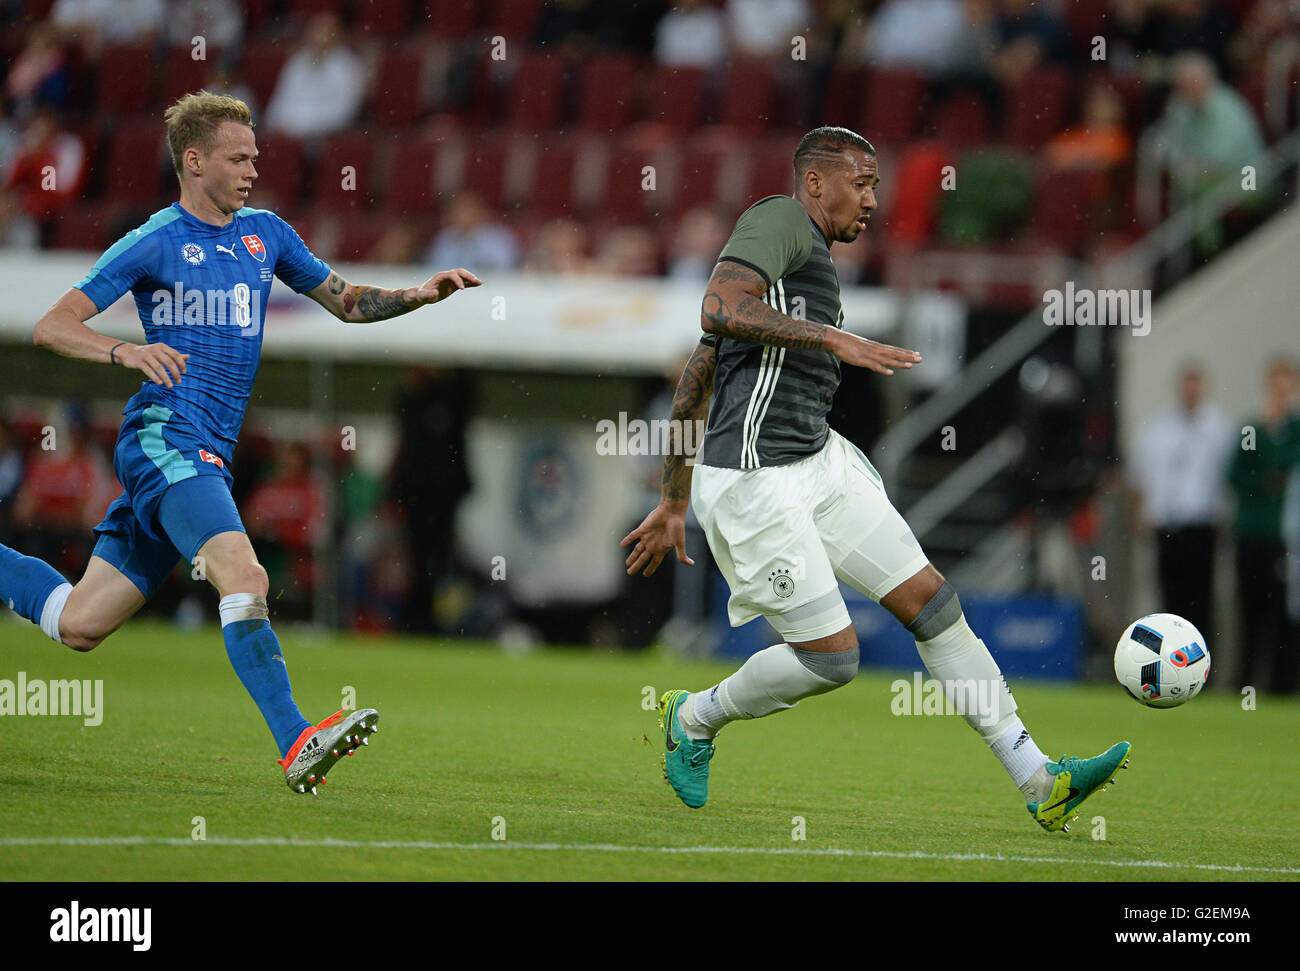 German's Jerome Boateng (R) and Slovakia's Ondrej Duda vie for the ball during the international soccer match between German and Slovakia in the WWK Arena in Augsburg, Germany, 29 May 2016. Photo: ANDREAS GEBERT/dpa Stock Photo